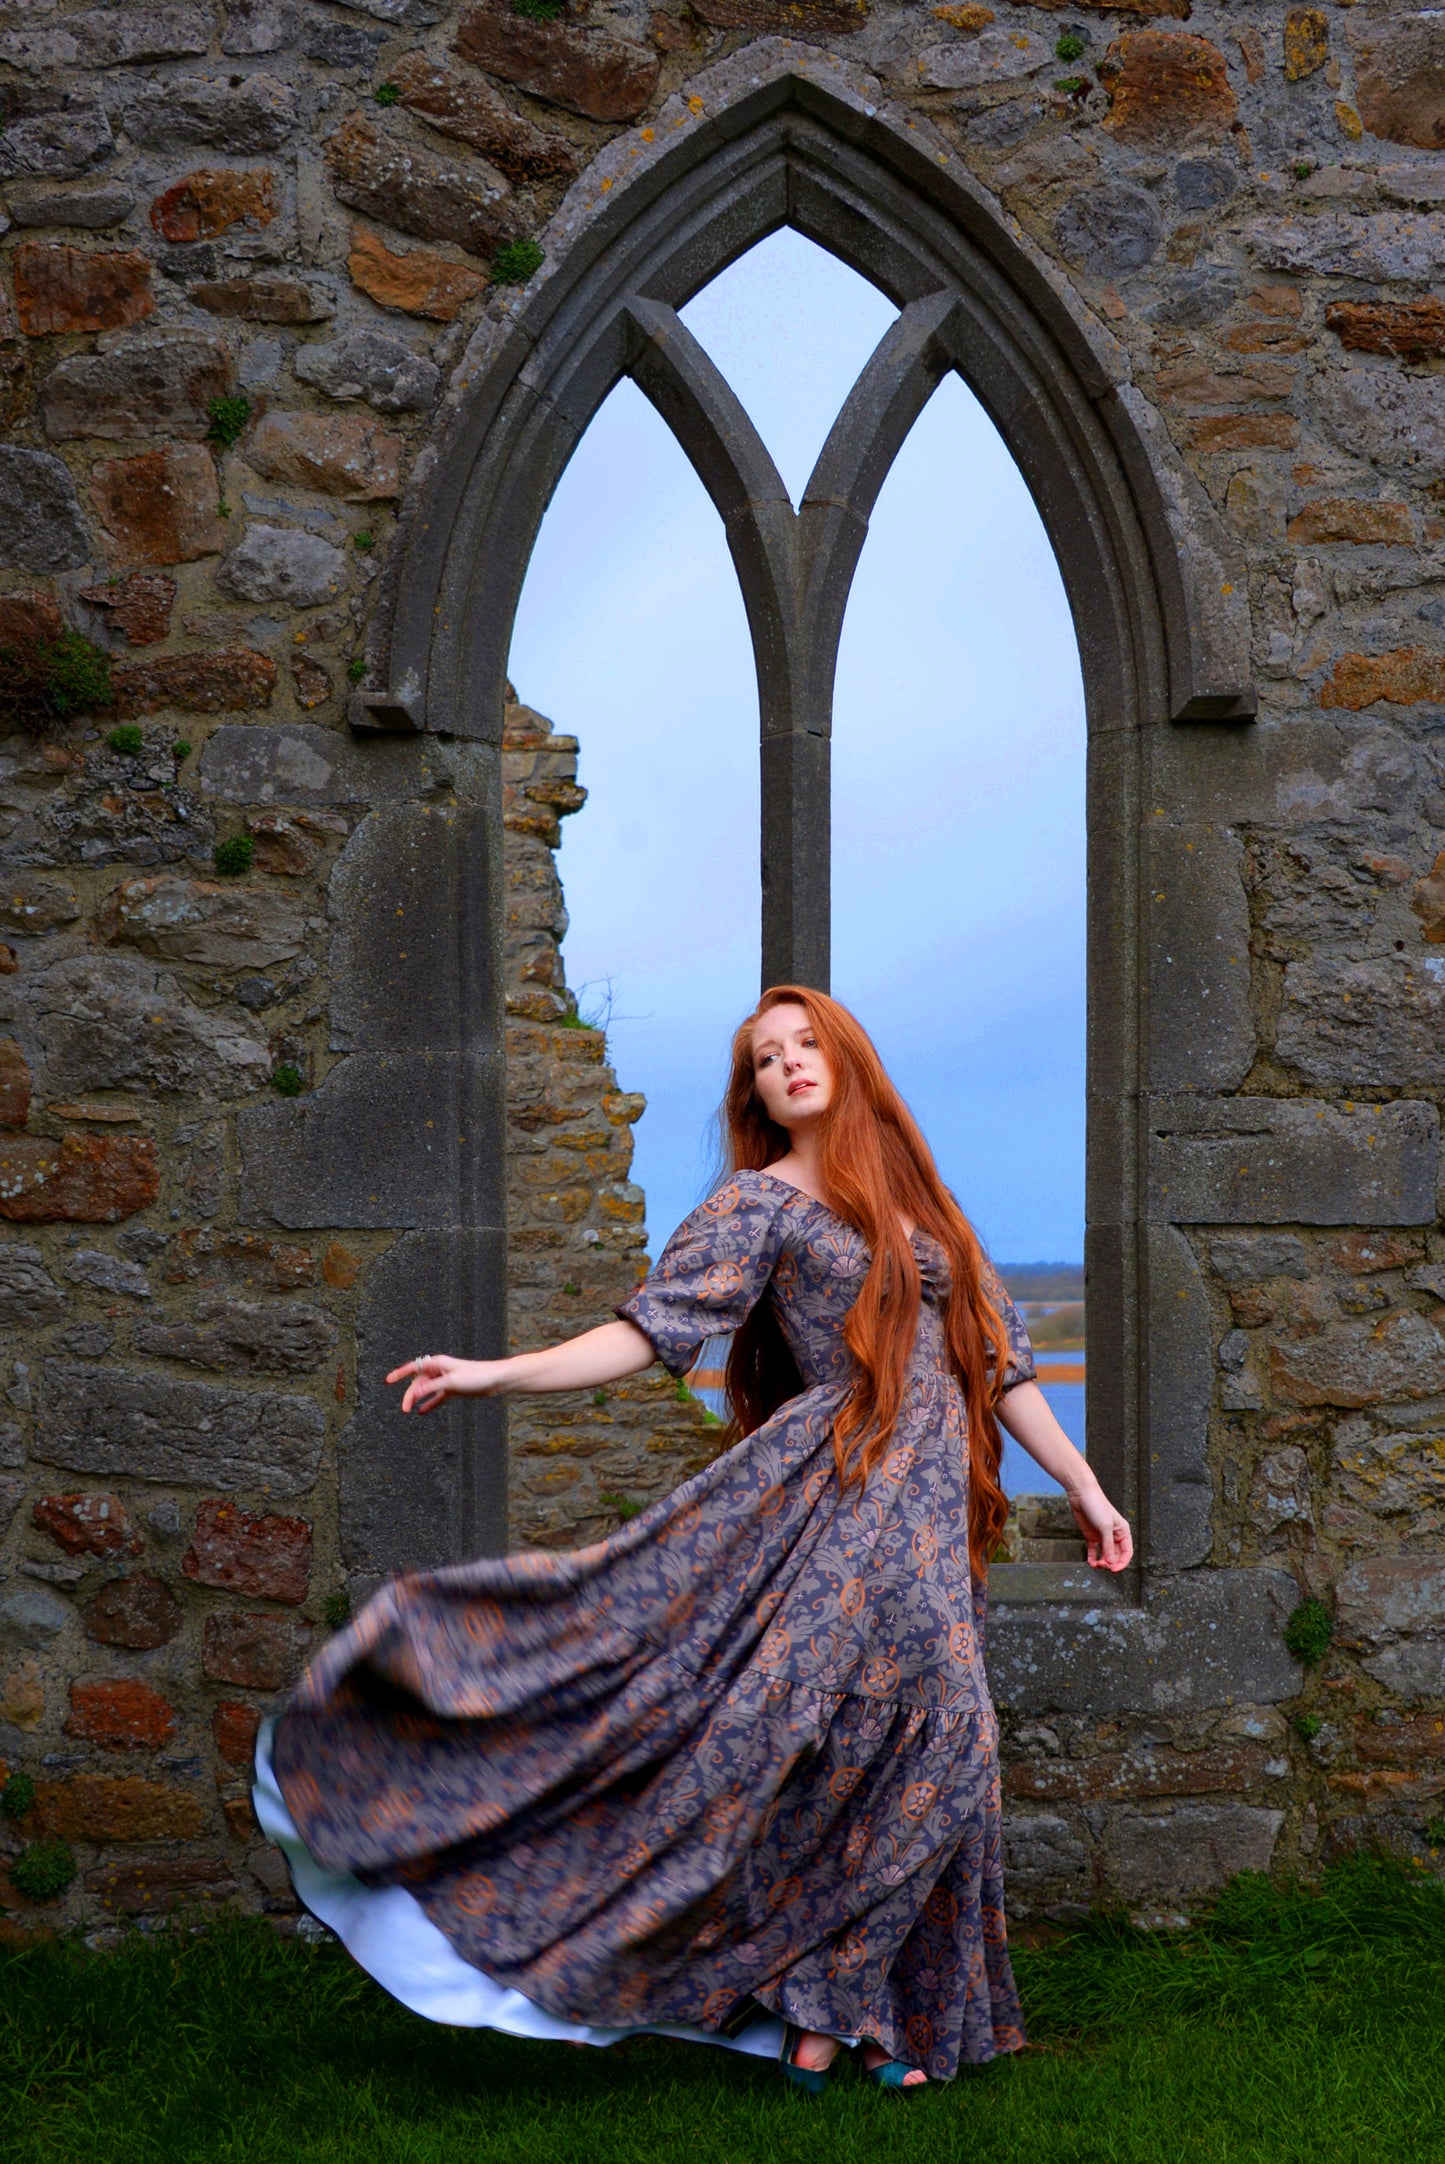 OYS - XS - S - M - L - Final Sale - Molly Medieval Gothic Maxi Gown in Royal Woods Print Crepe | Laura Byrnes & Hope Johnstun